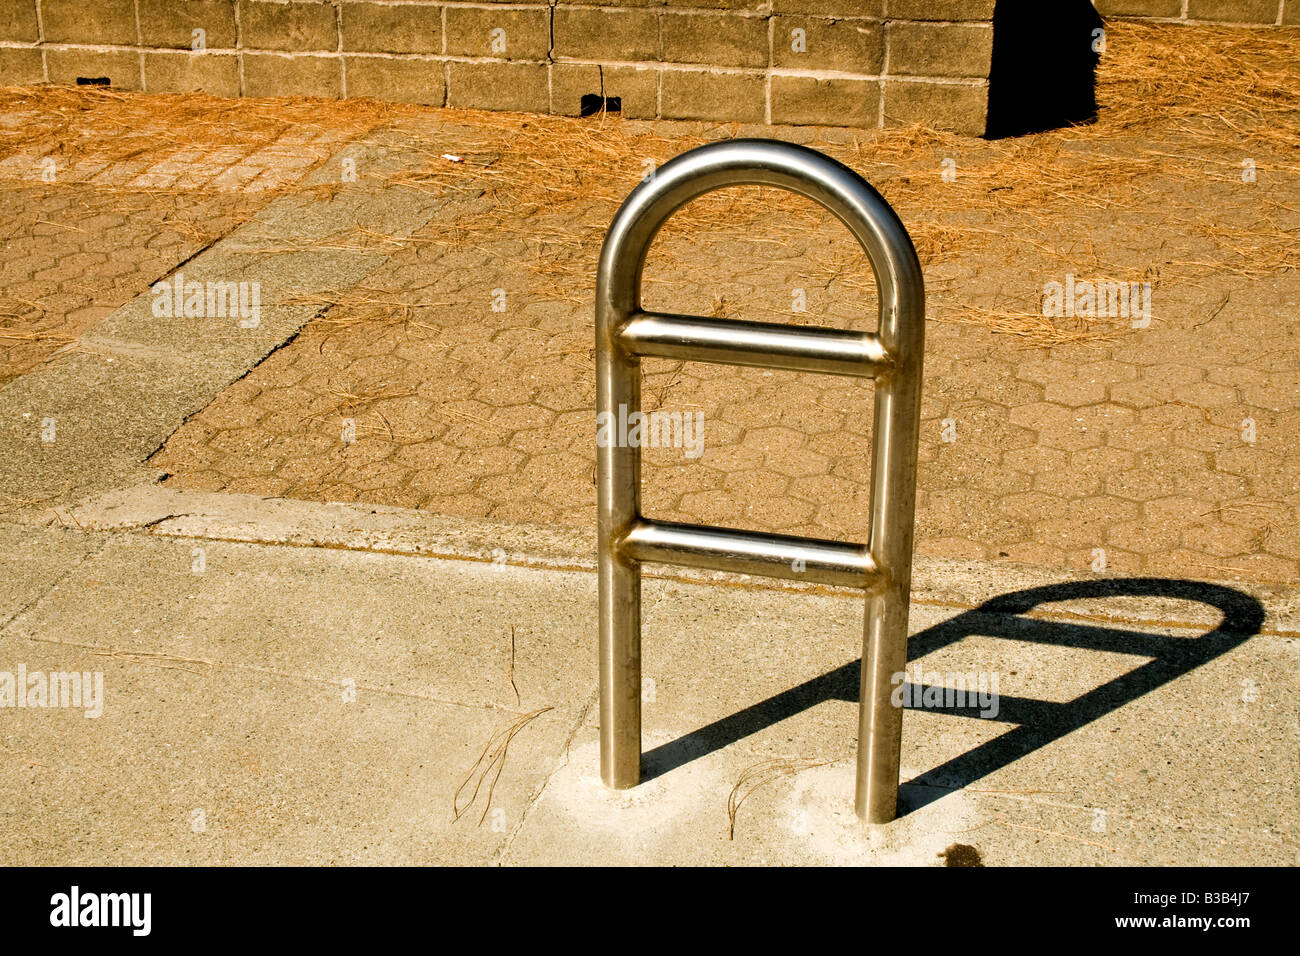 Rounded metal rack anchored to a sidewalk Stock Photo